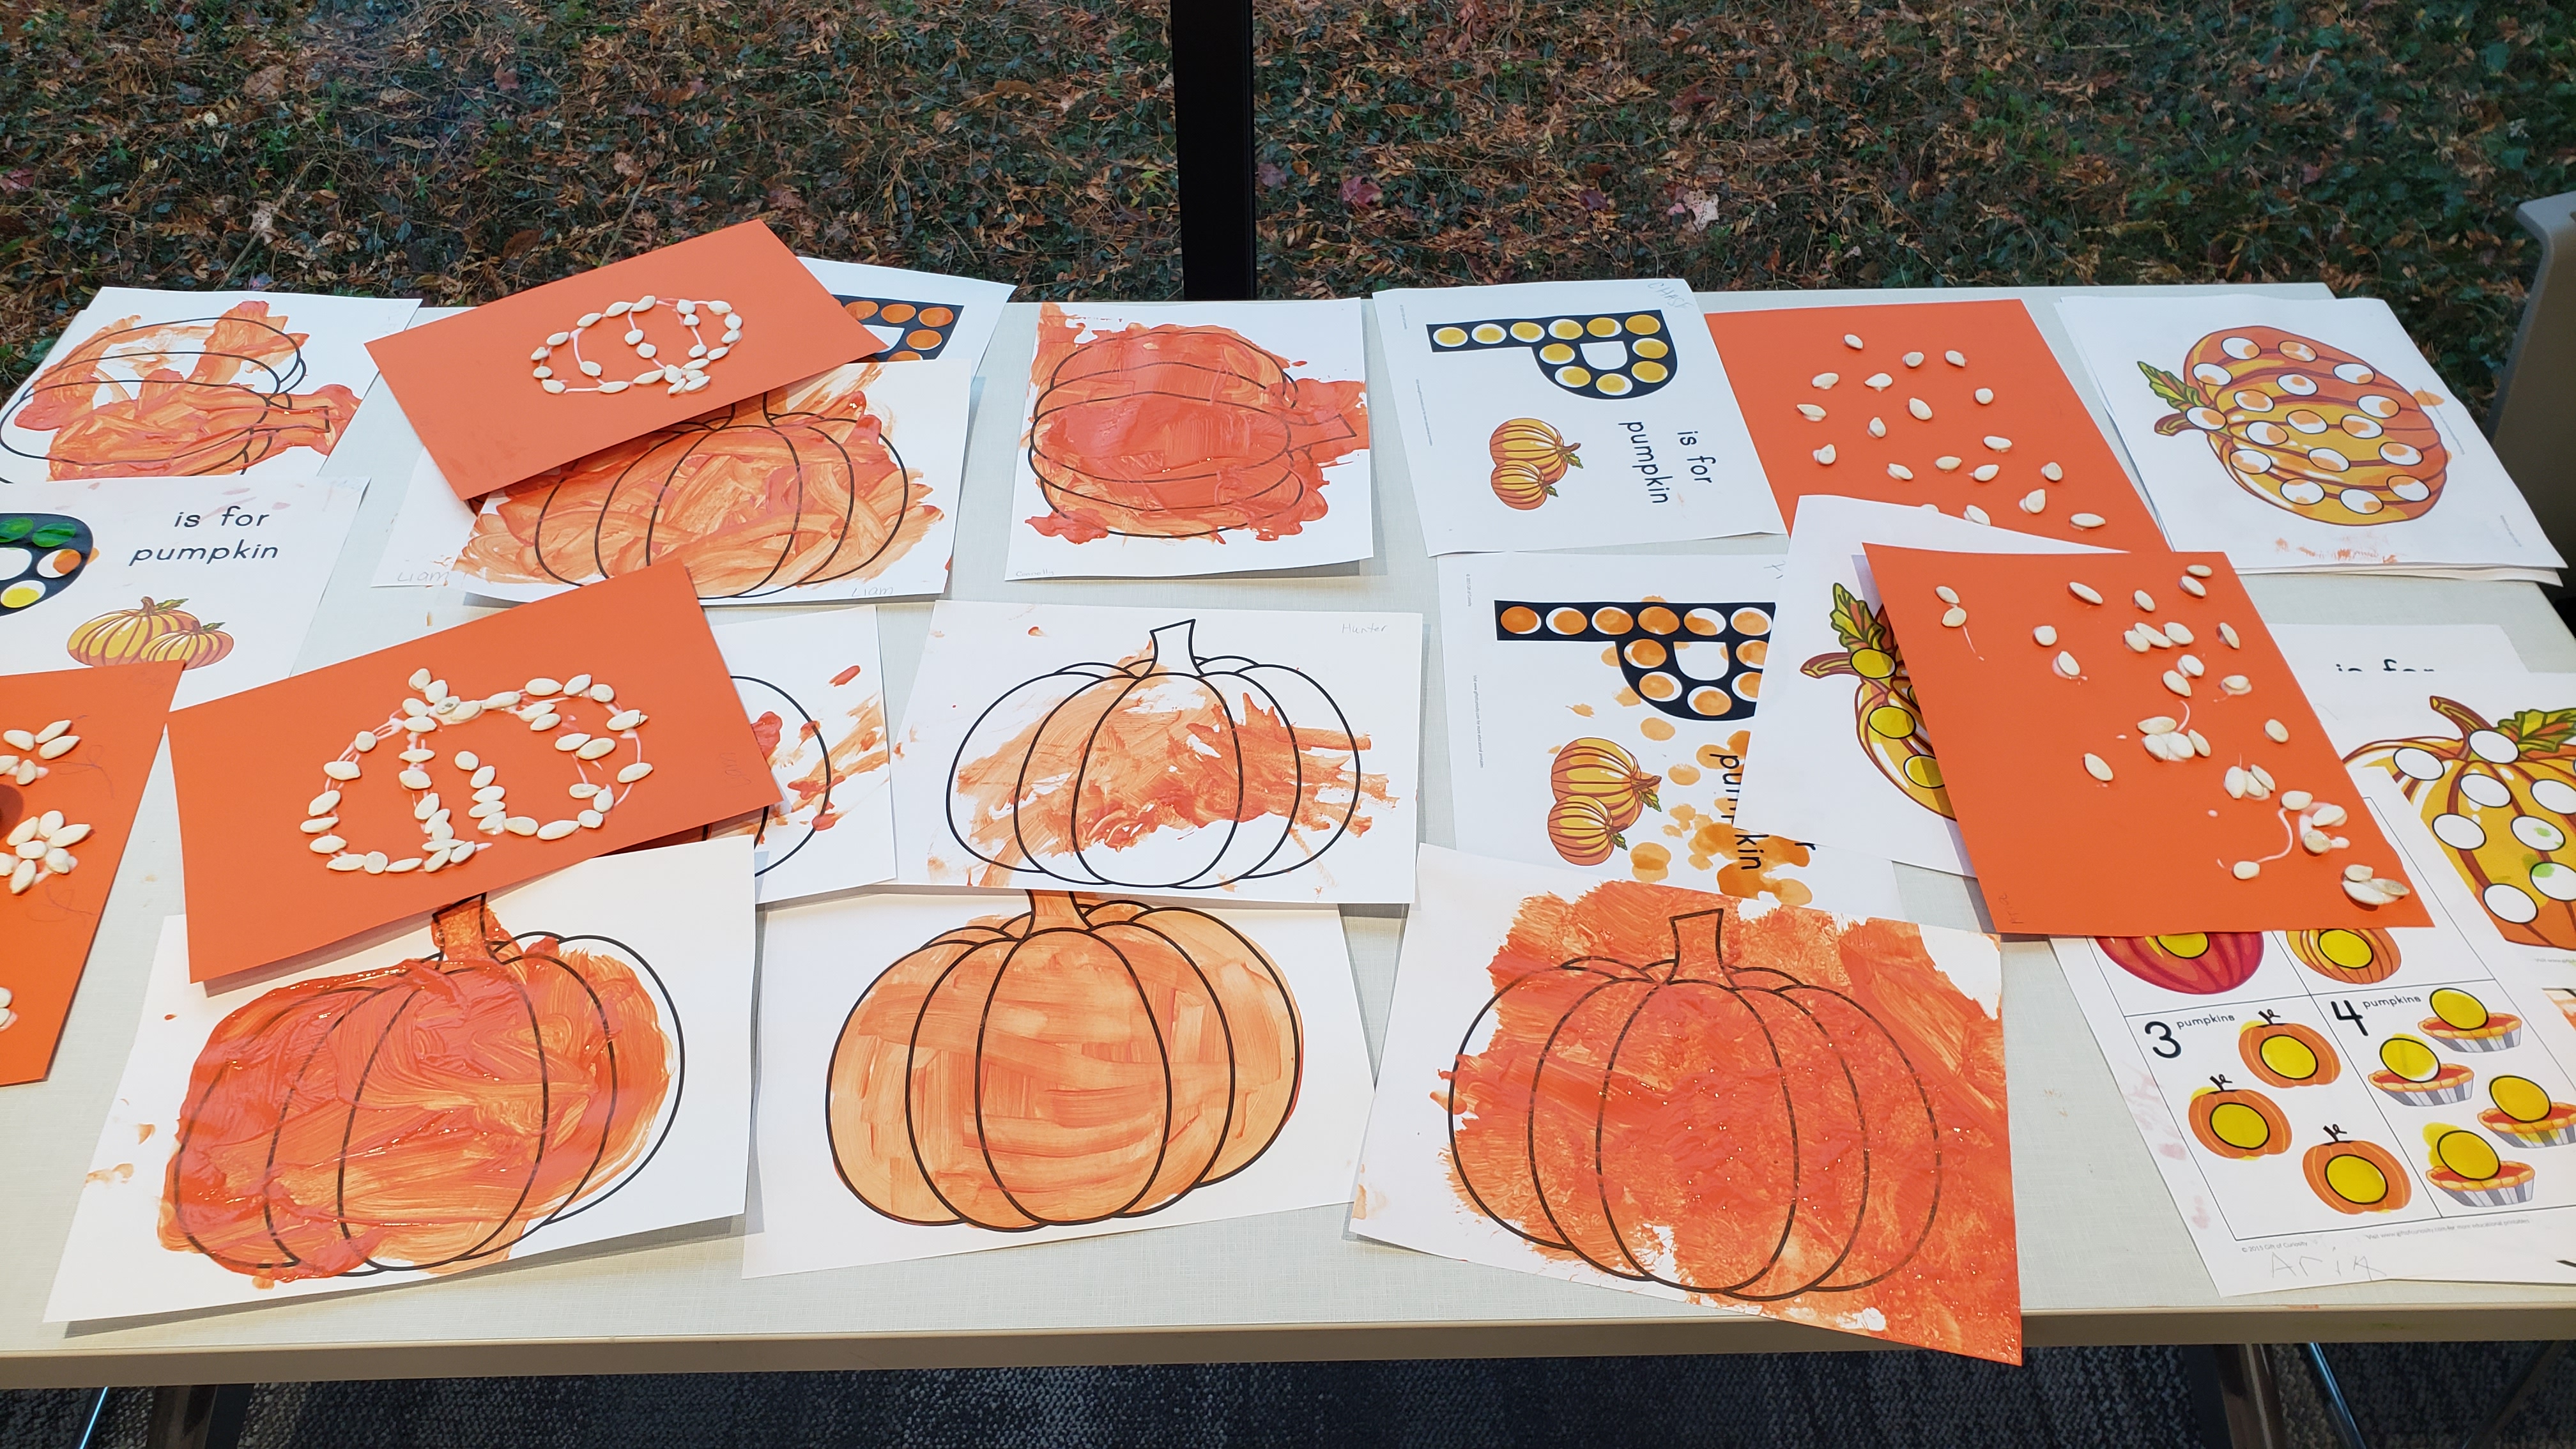 Orange painted pumpkins and pumpkin outlines created with pumpkin seeds.